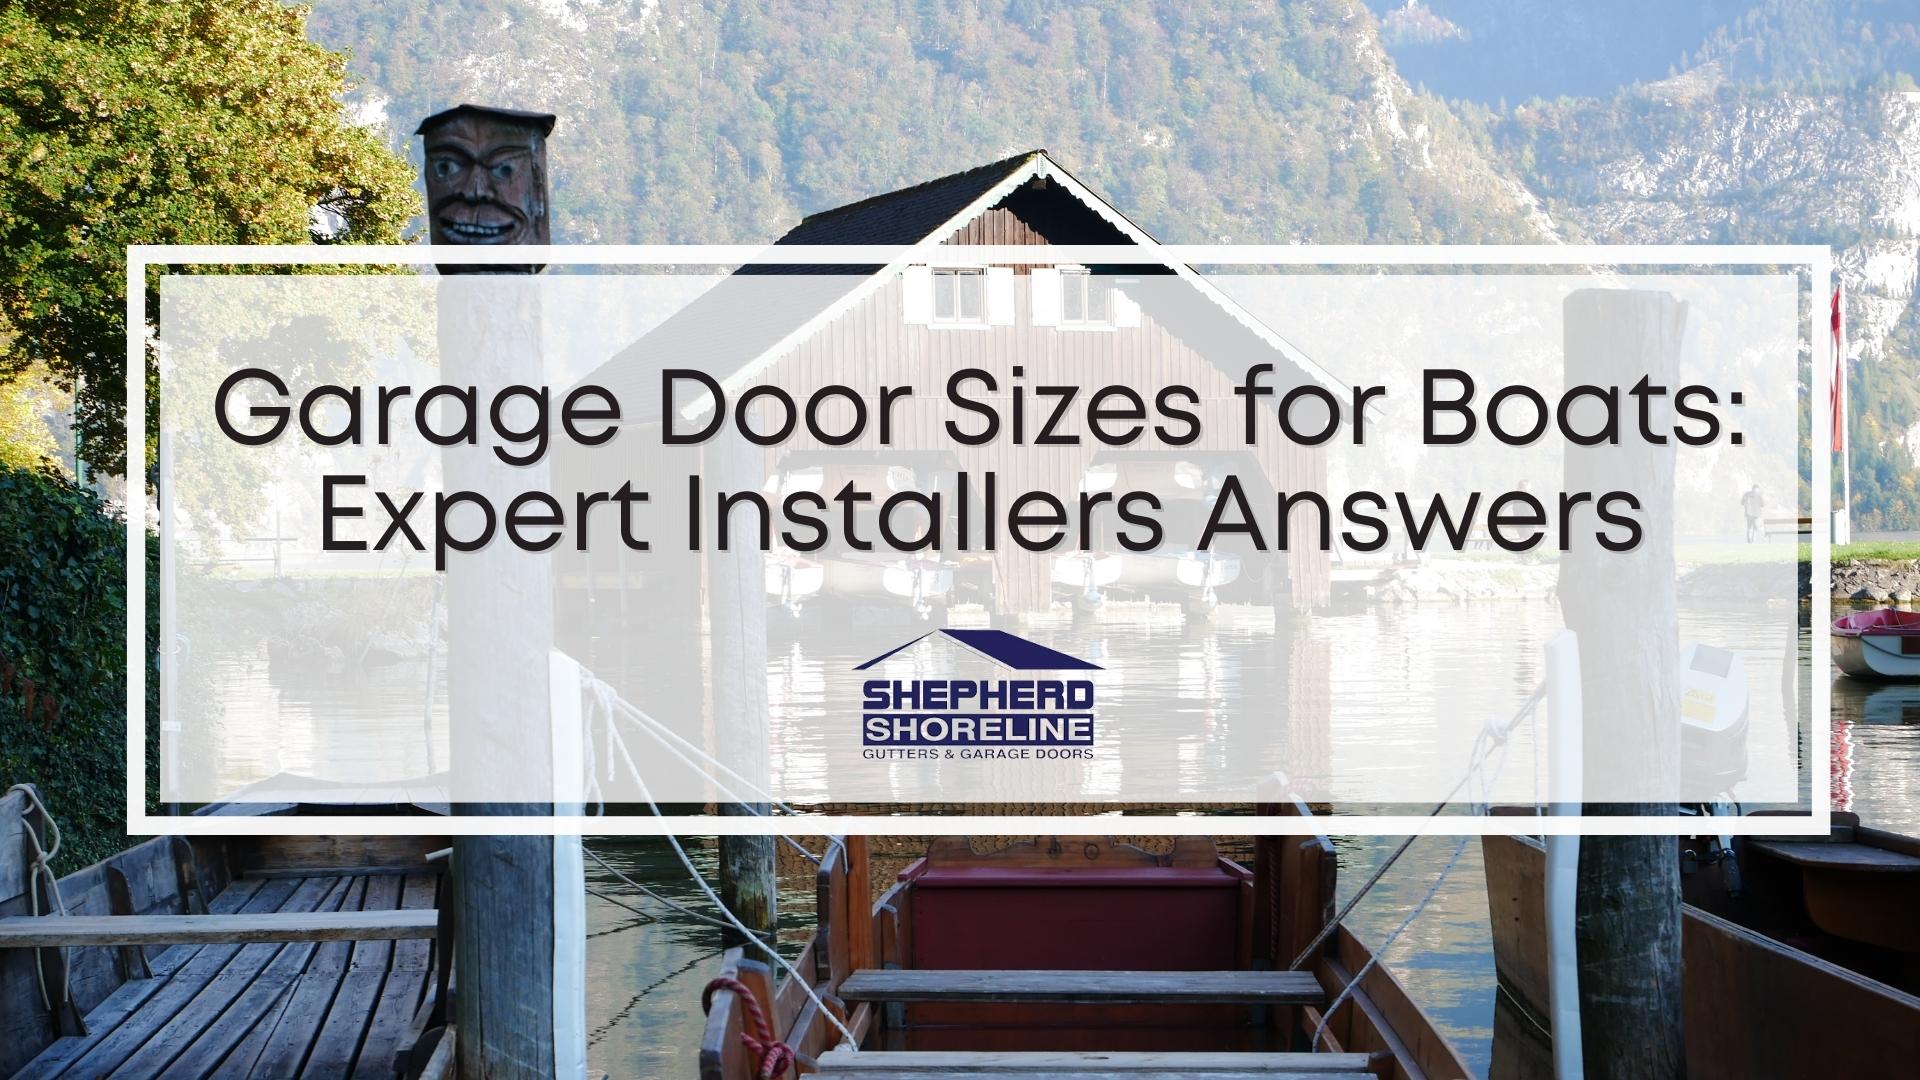 Featured image of garage door sizes for boats